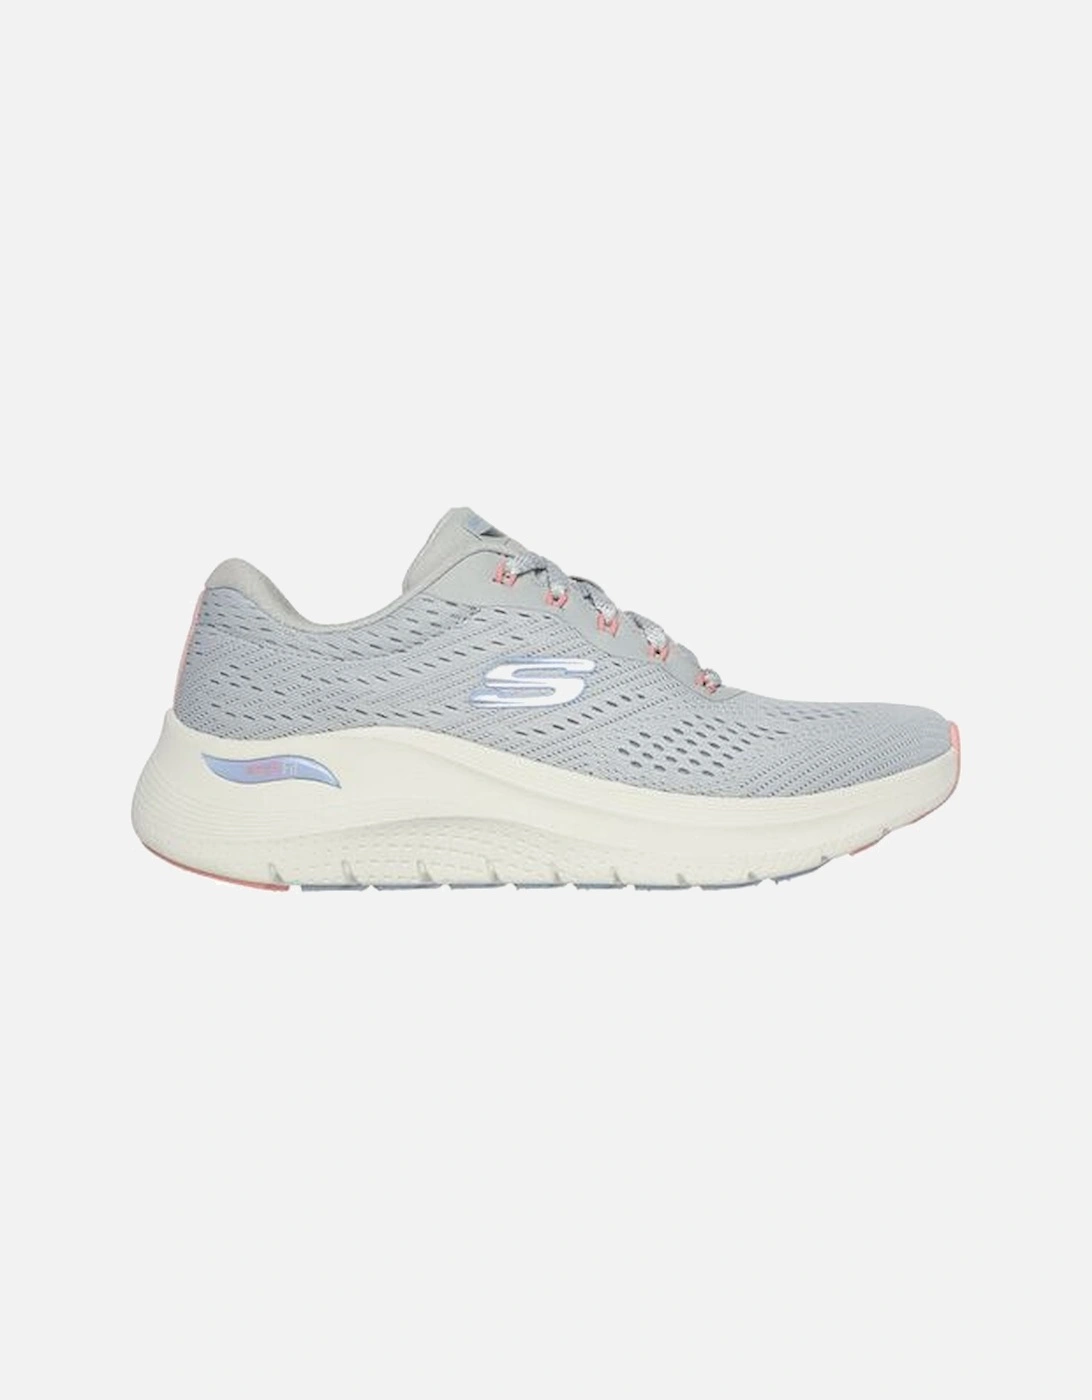 150051 Arch Fit 2.0 in Light Grey/Multi, 2 of 1